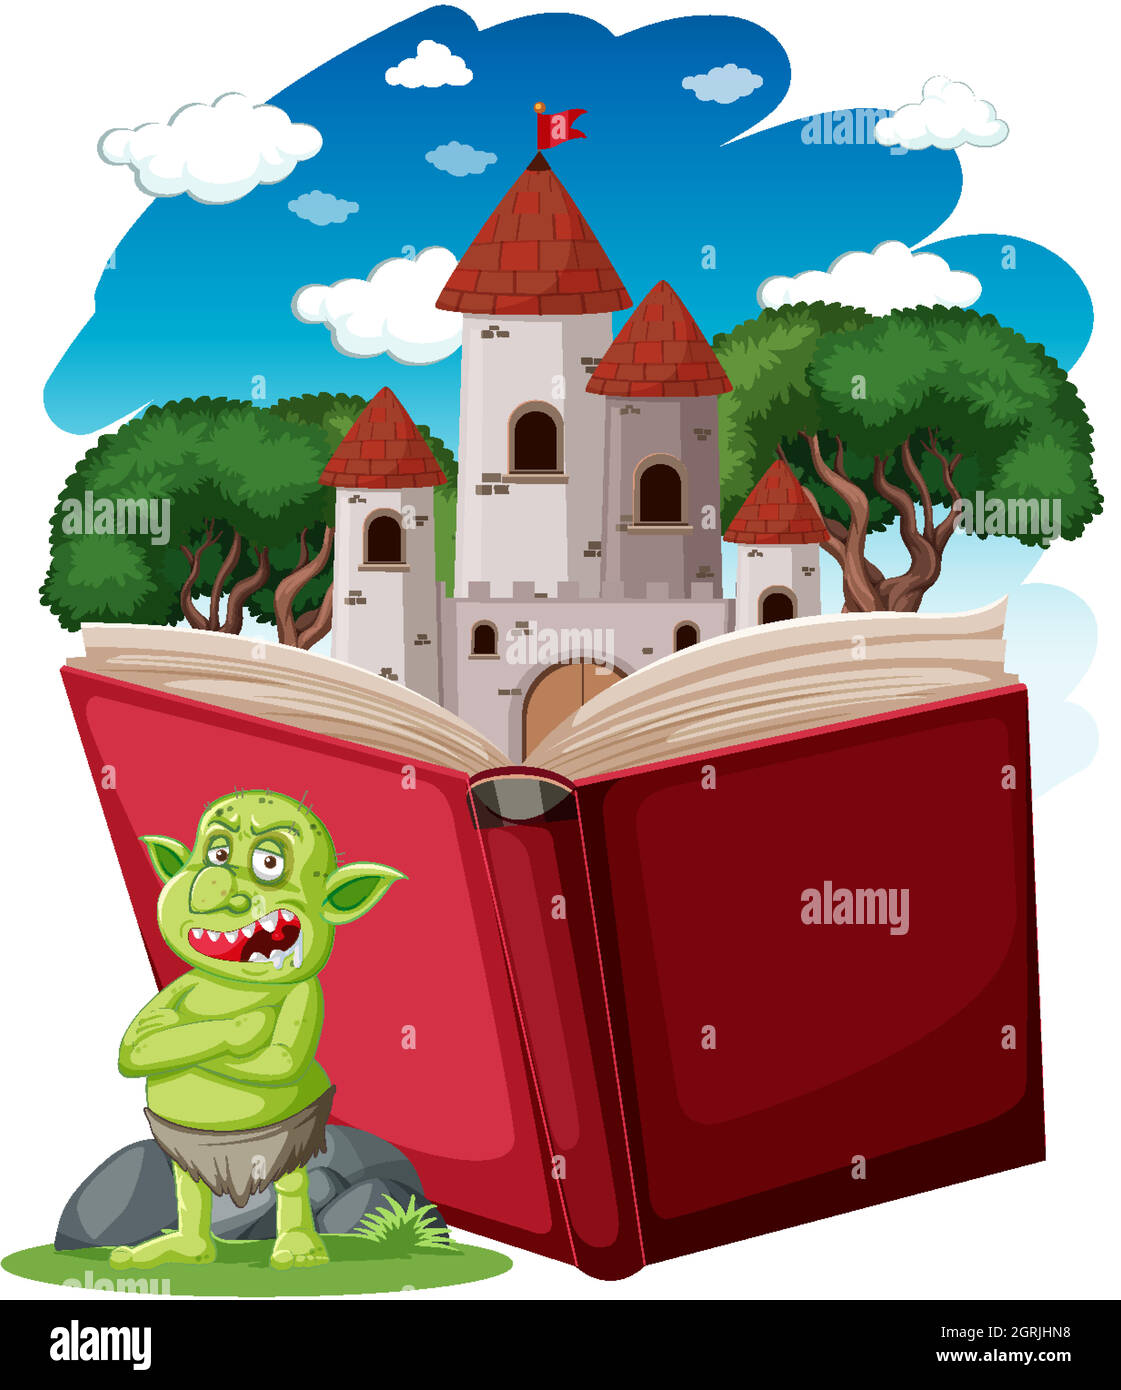 Goblin or troll cartoon character with a story book Stock Vector